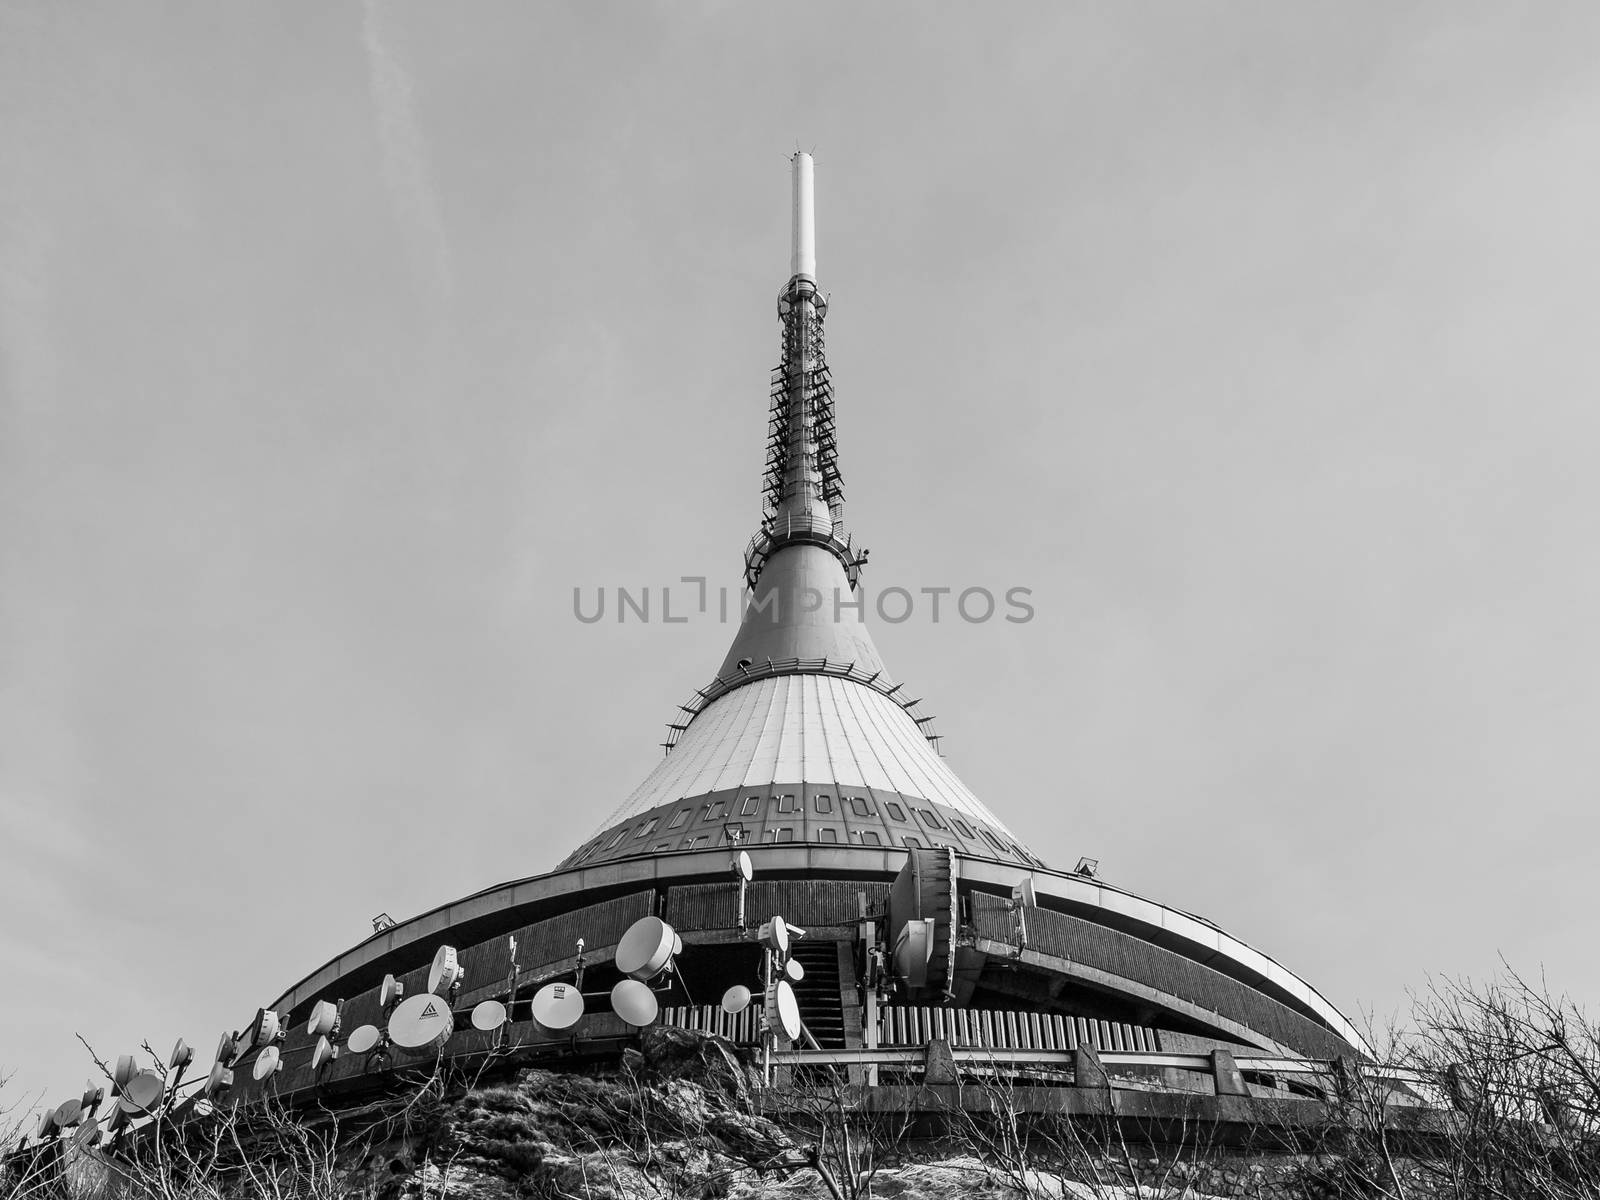 Jested - unique architectural building. Hotel and TV transmitter on the top of Jested Mountain, Liberec, Czech Republic. Black and white image.